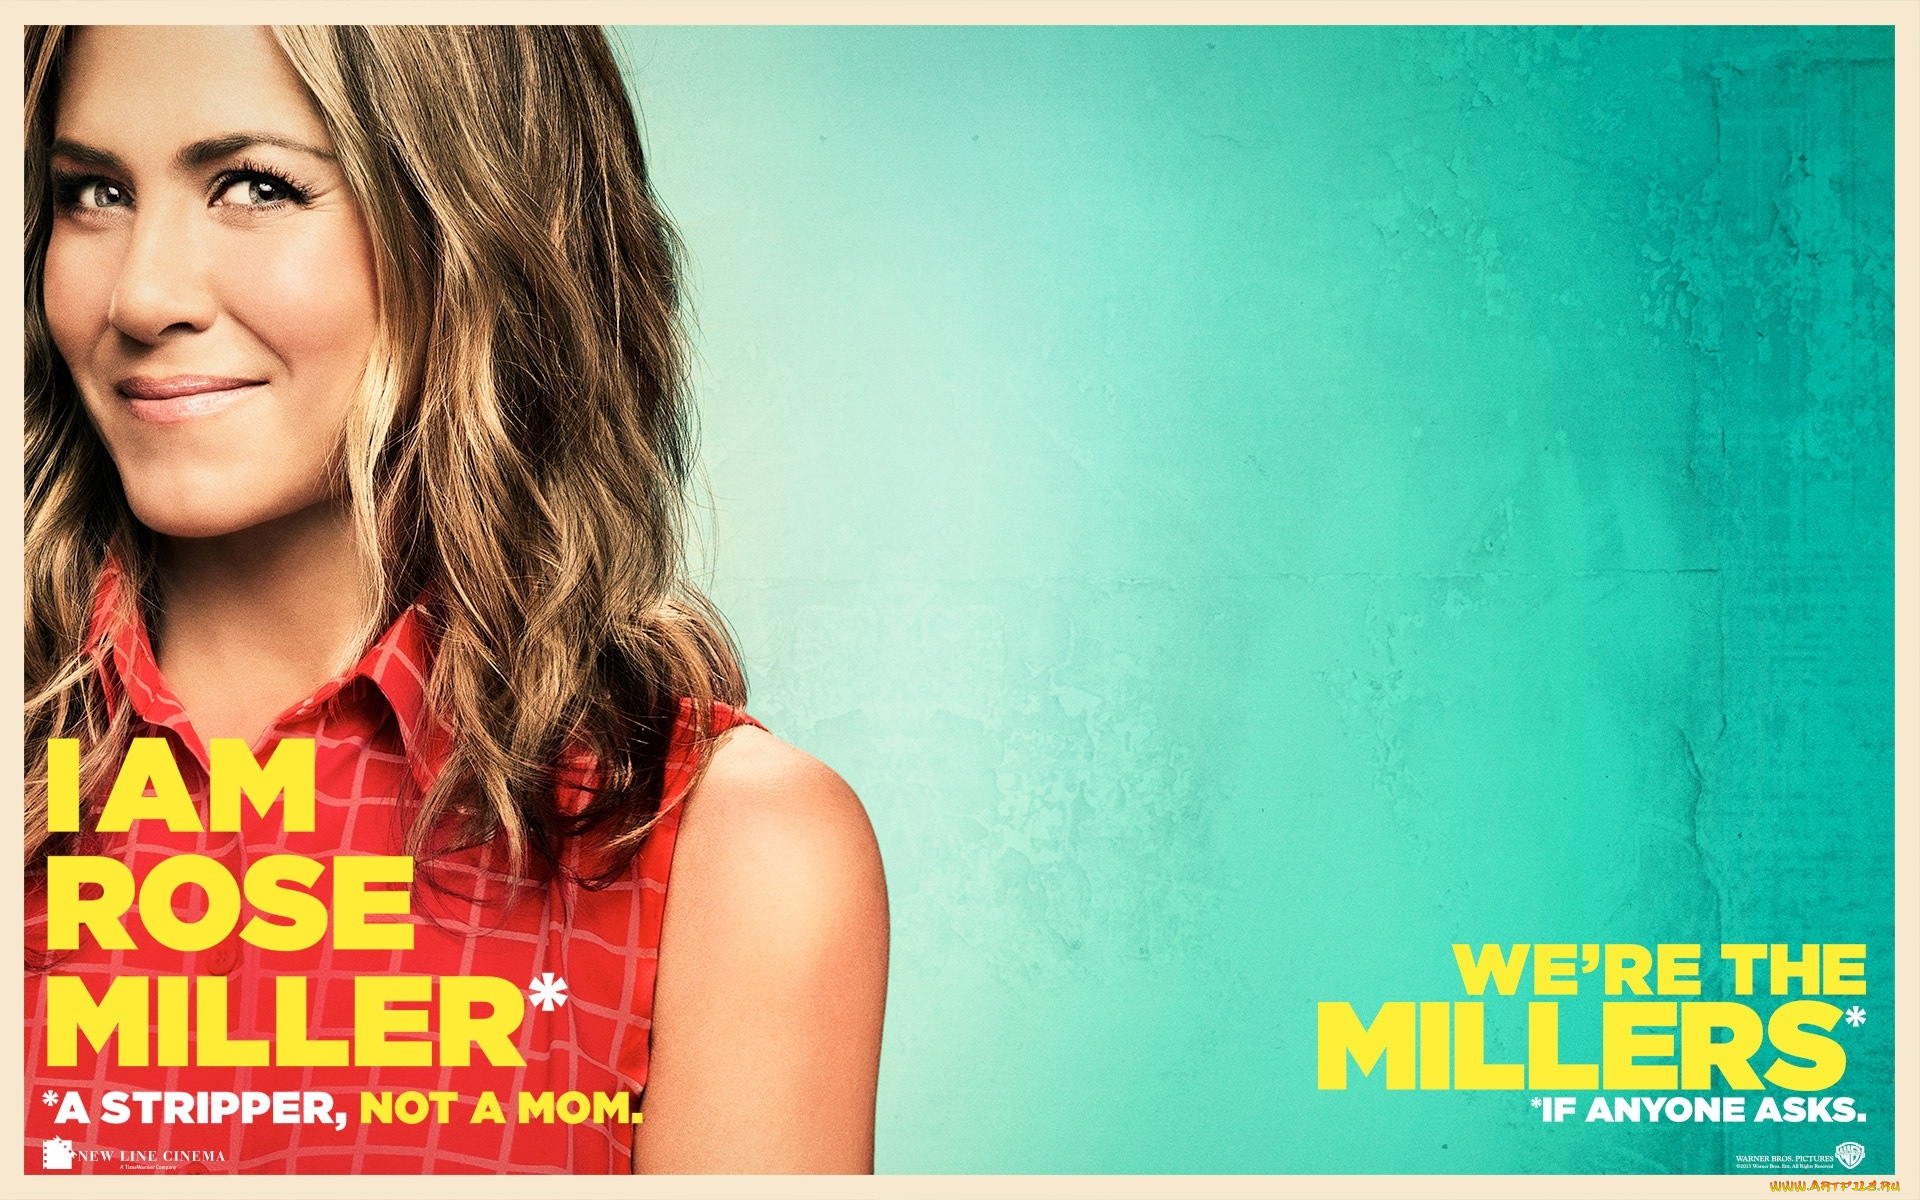  , we`re the millers, , , , , , we're, millers, the